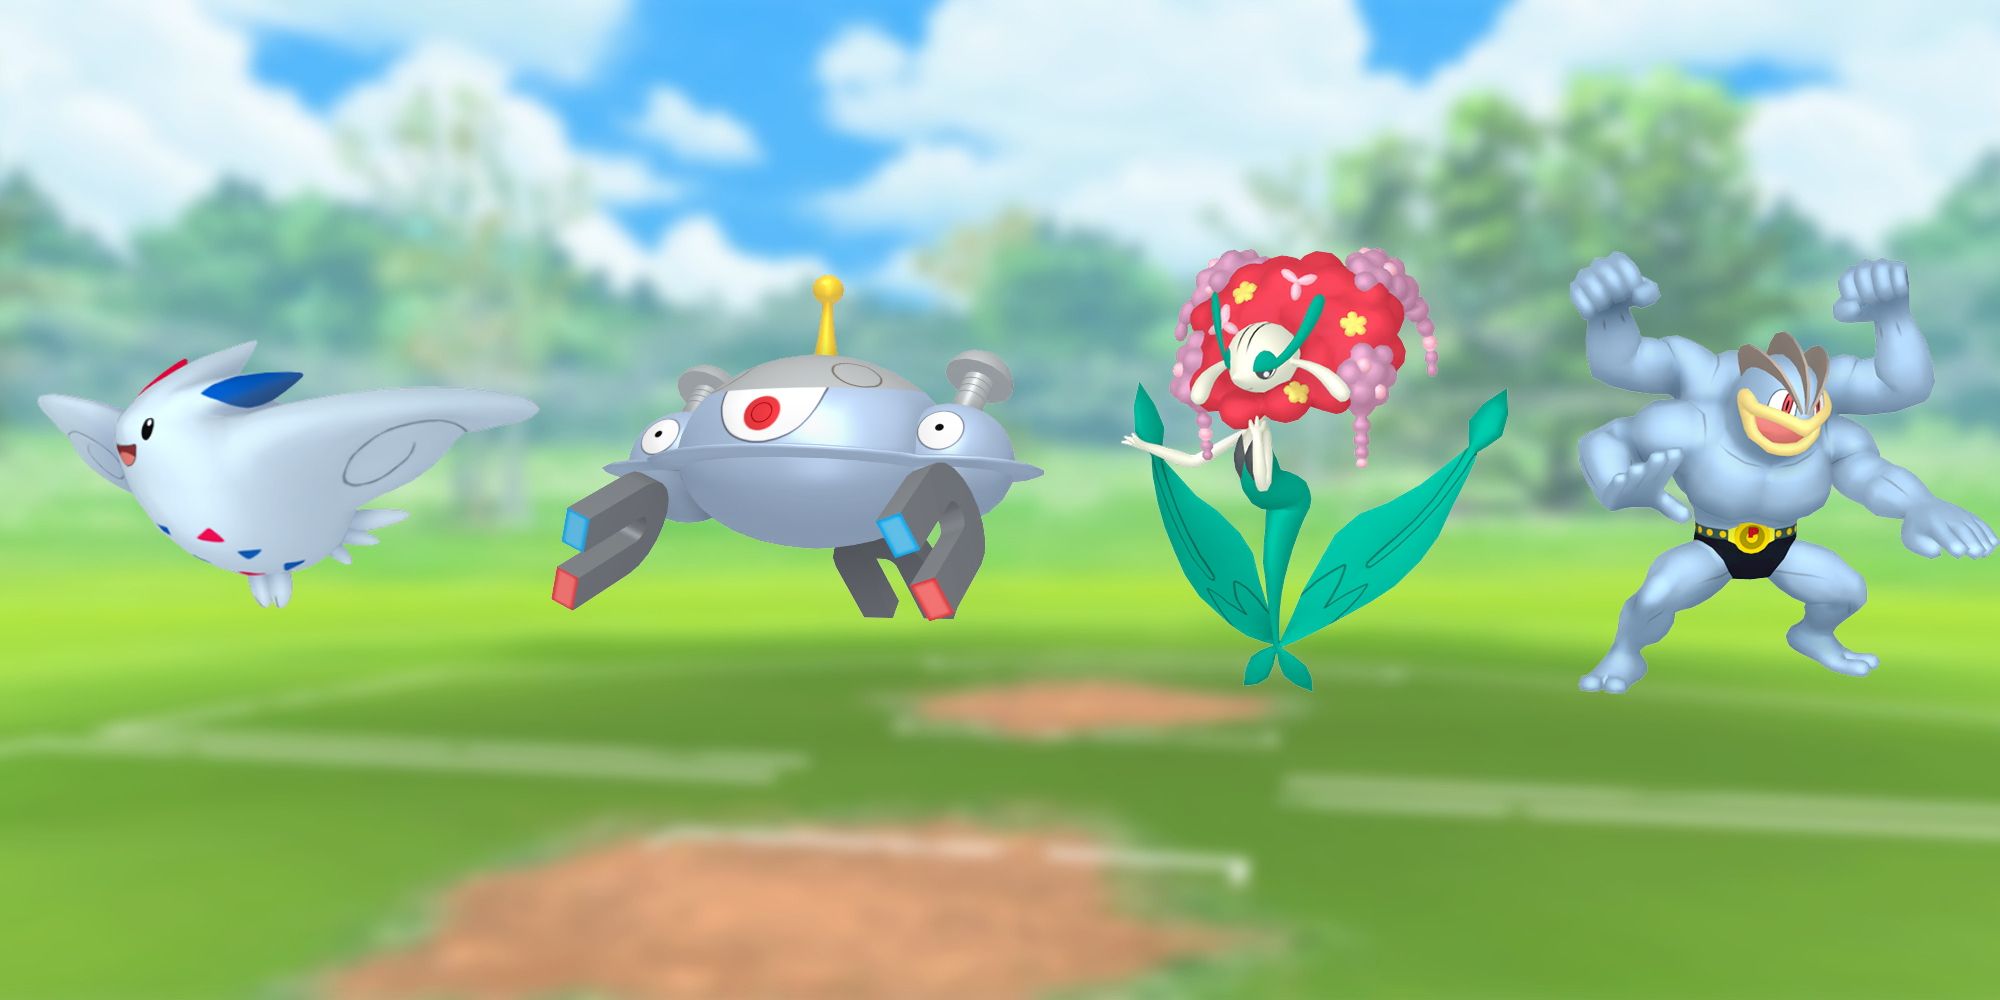 Togekiss, Magnezone, Florges, and Machamp from Pokemon